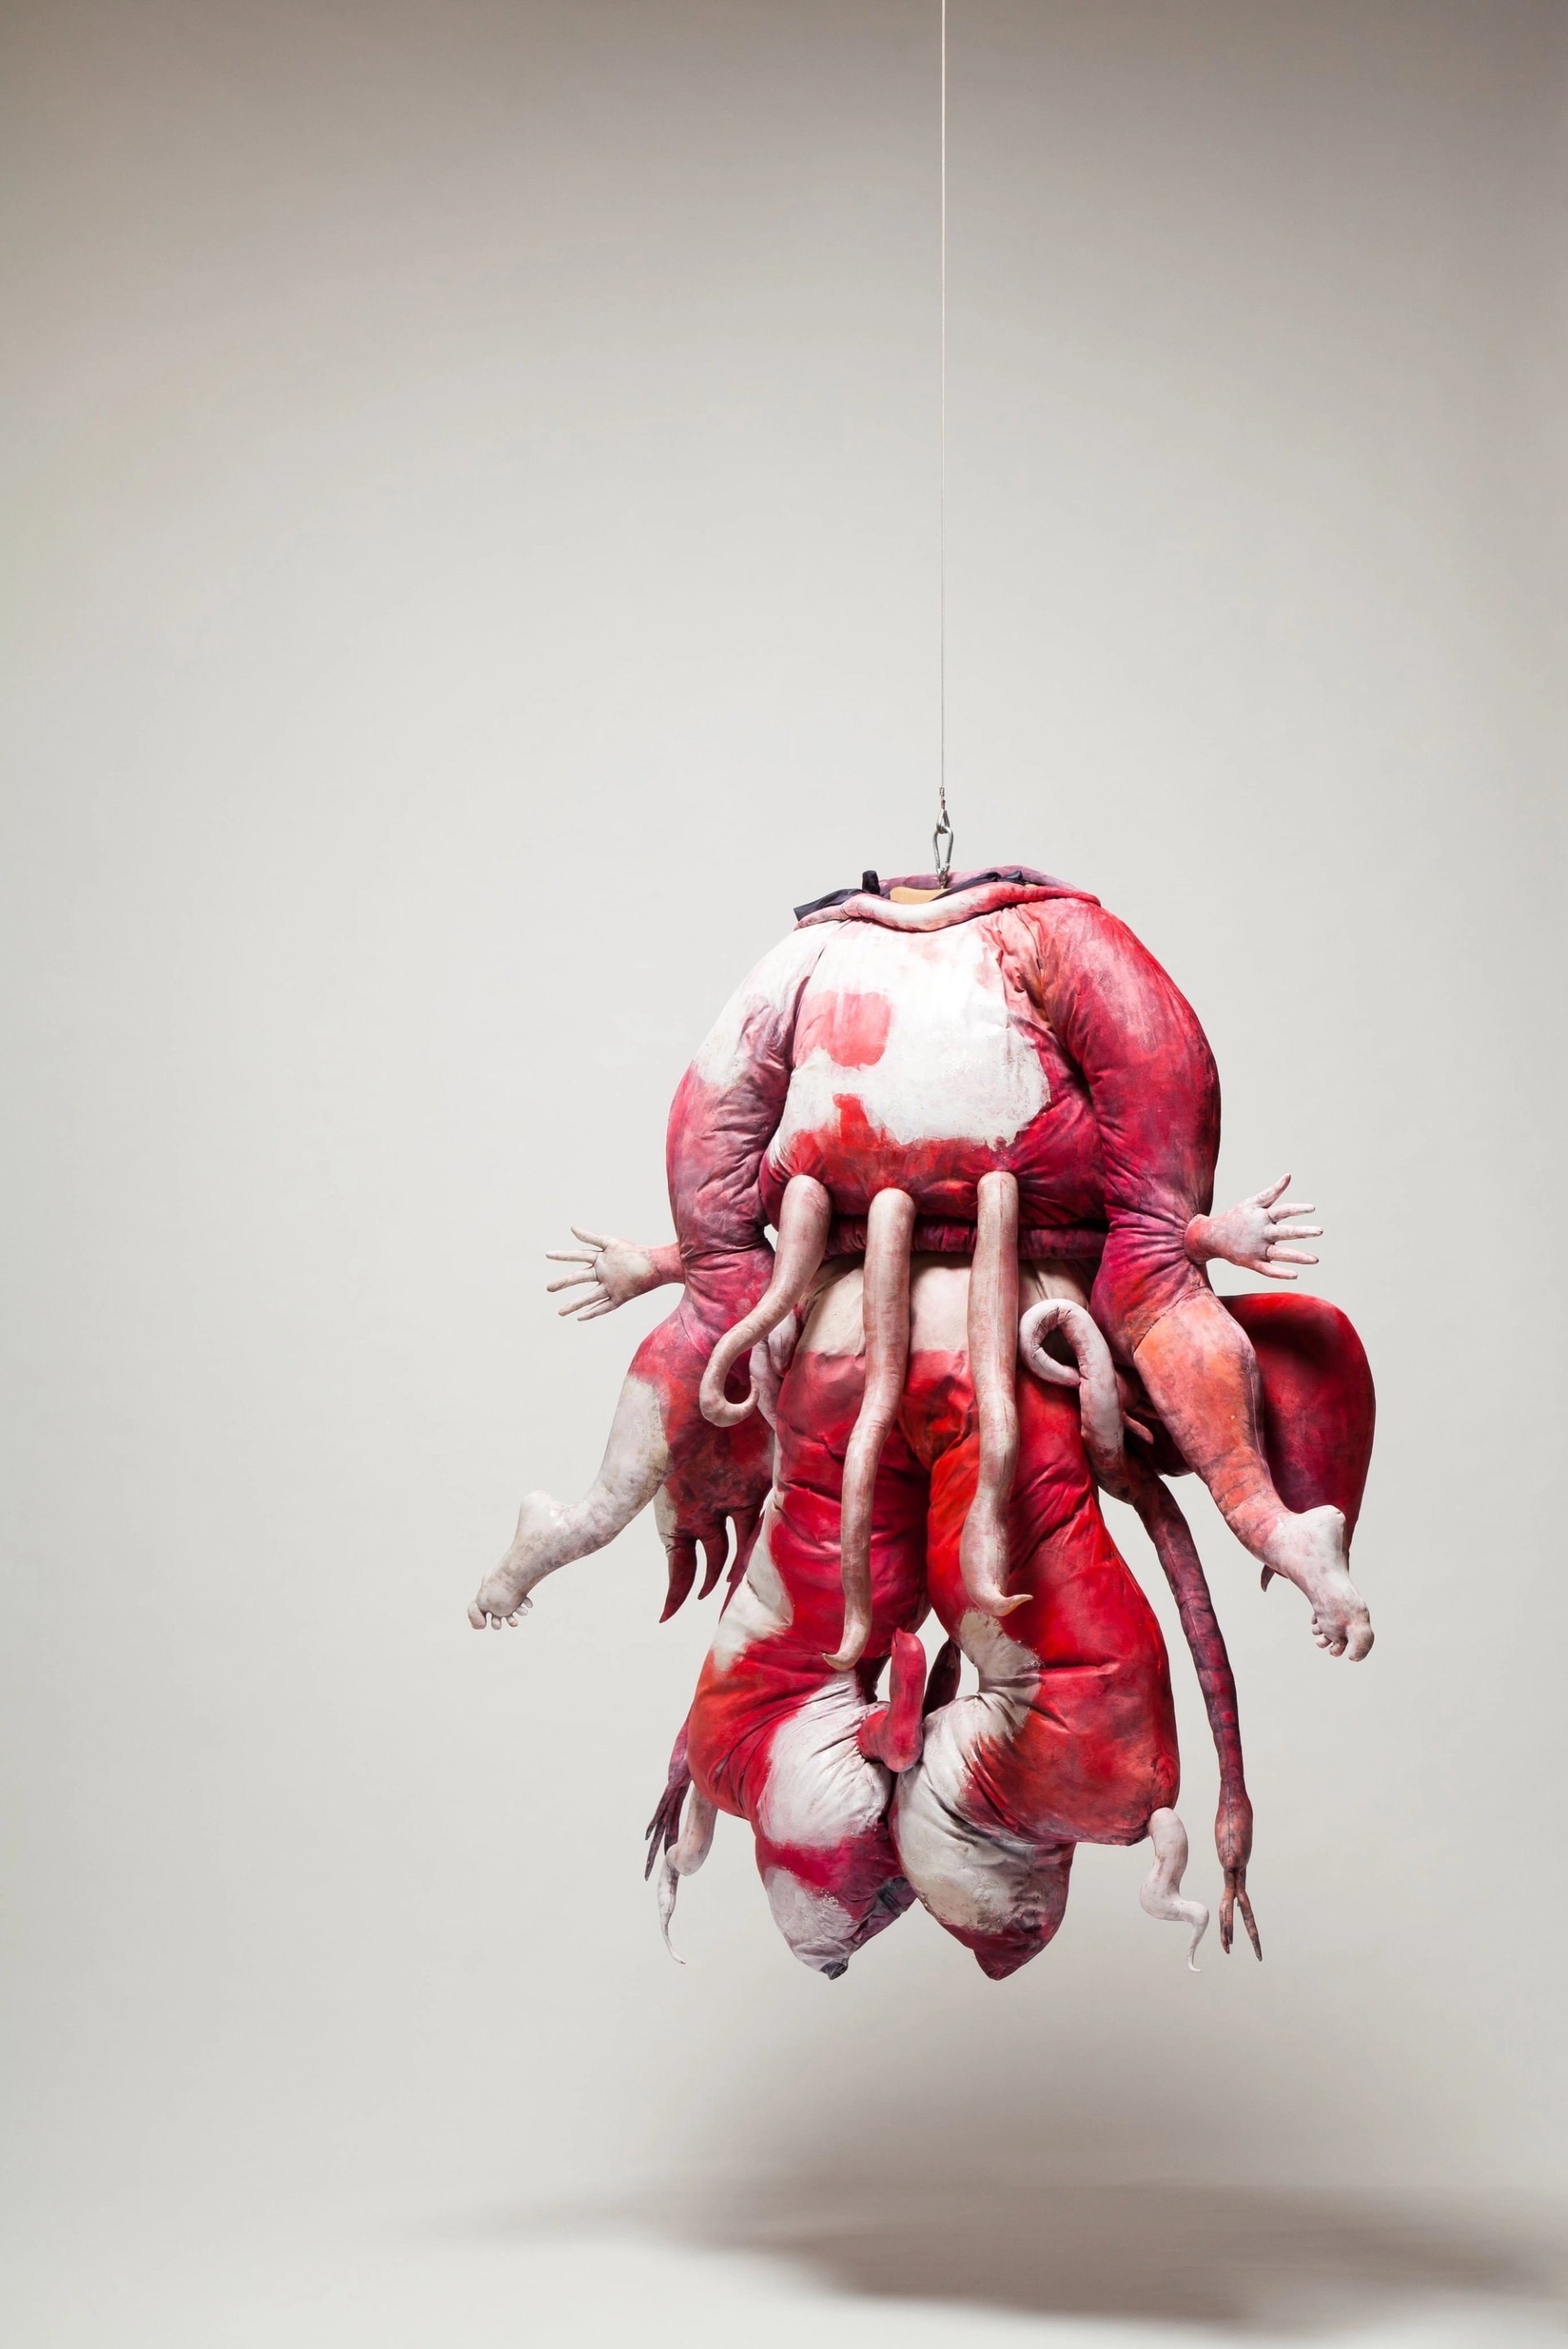 Lee Bul, "Untitled (Cravings Red)", 2011 (reconstruction of 1988 work). Photo: Jeon Byung-cheol, Courtesy of Studio Lee Bul